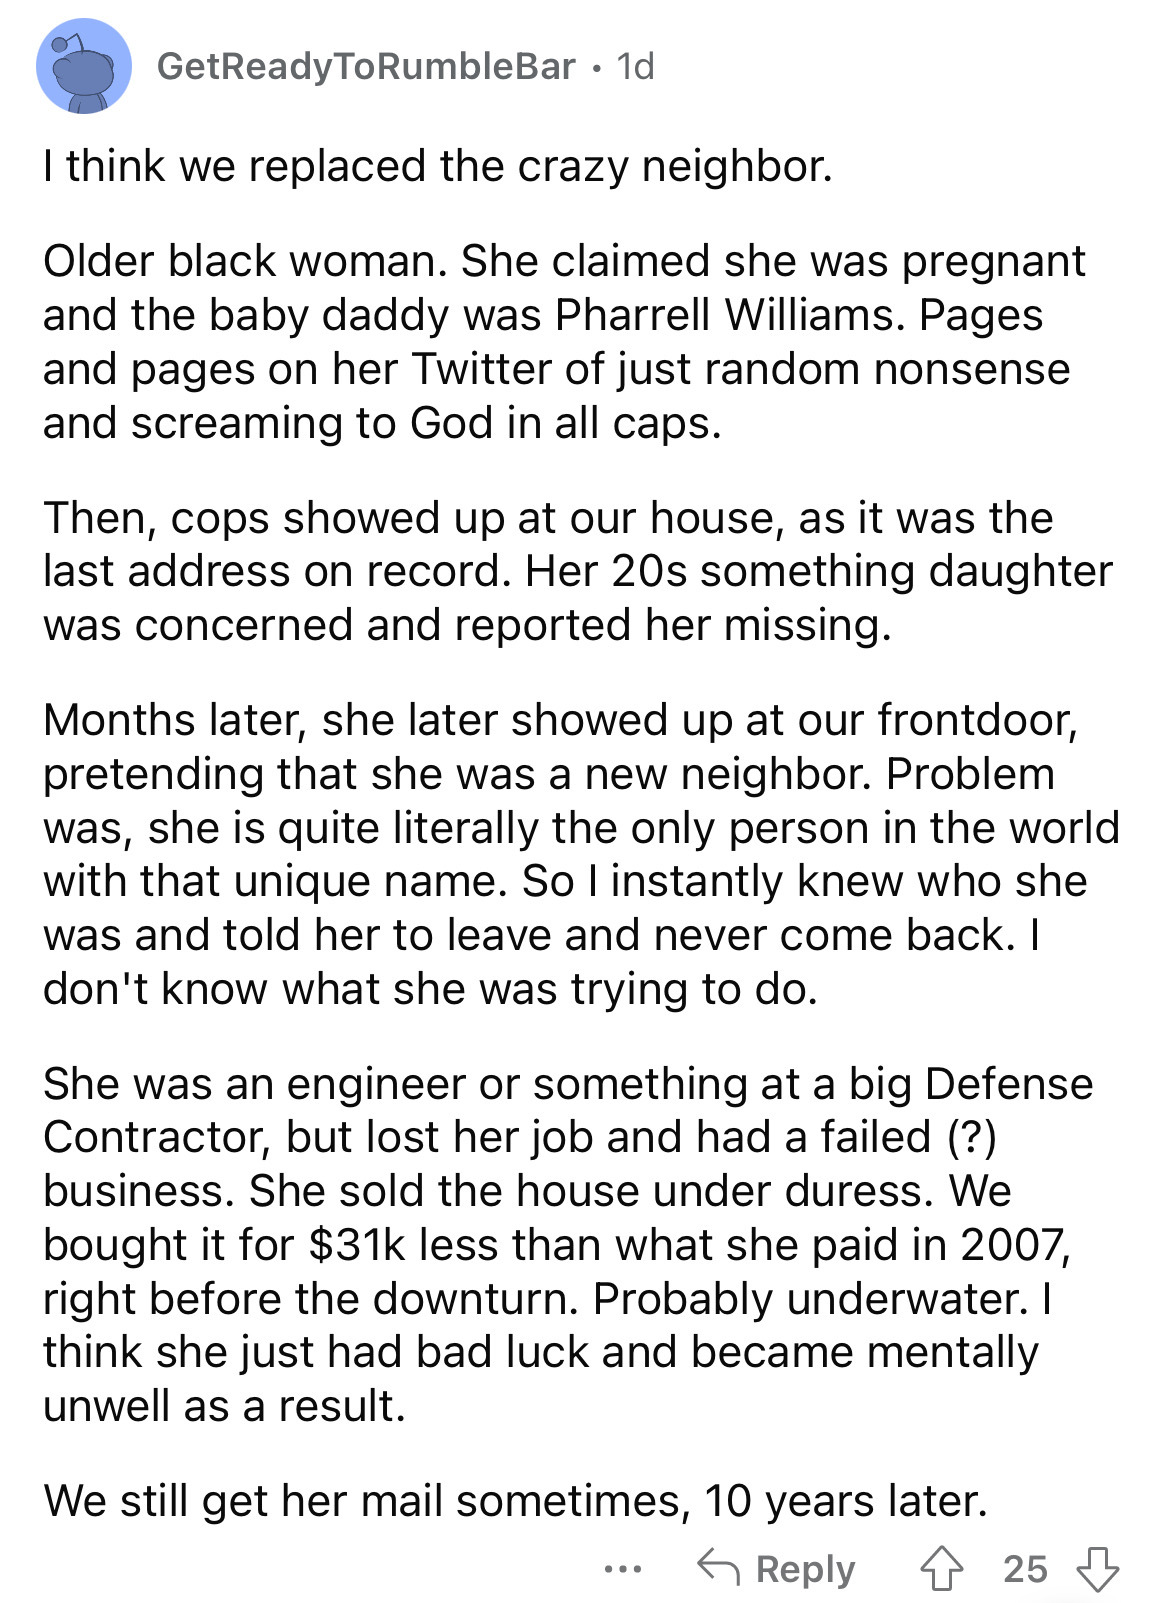 document - GetReady To RumbleBar. 1d I think we replaced the crazy neighbor. Older black woman. She claimed she was pregnant and the baby daddy was Pharrell Williams. Pages and pages on her Twitter of just random nonsense and screaming to God in all caps.